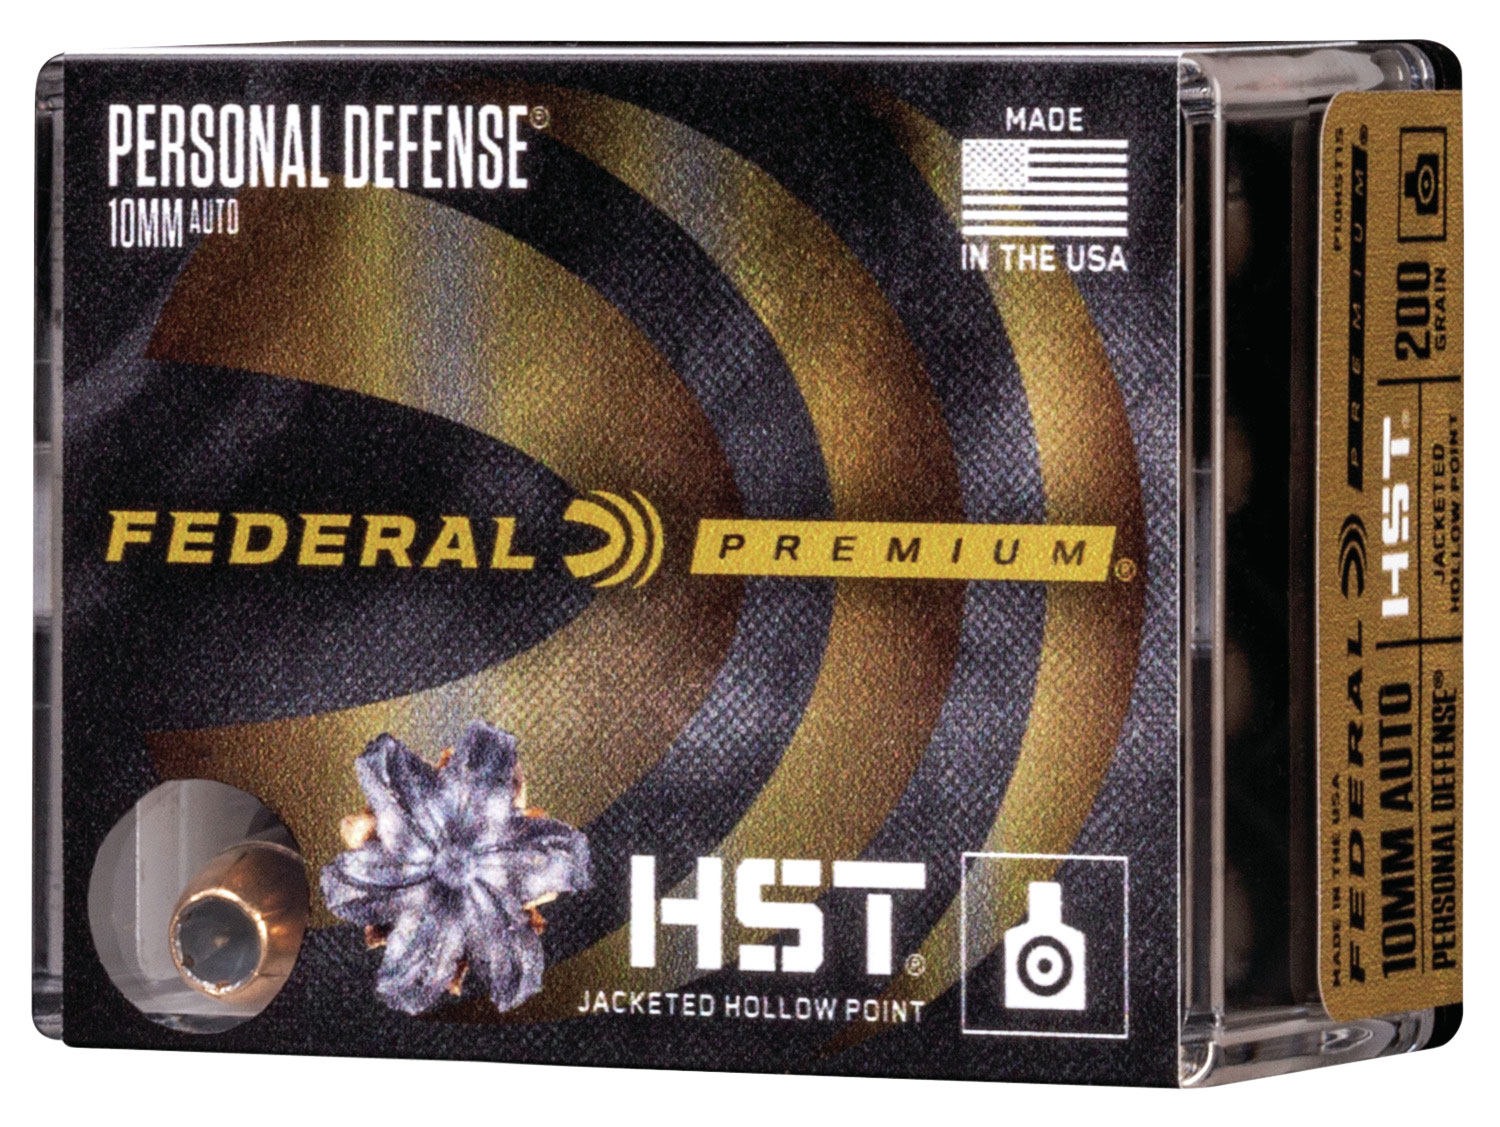 Federal P10HST1S Premium Personal Defense 10mm Auto 200 gr HST Jacketed Hollow Point 20 Bx/ 10 Cs